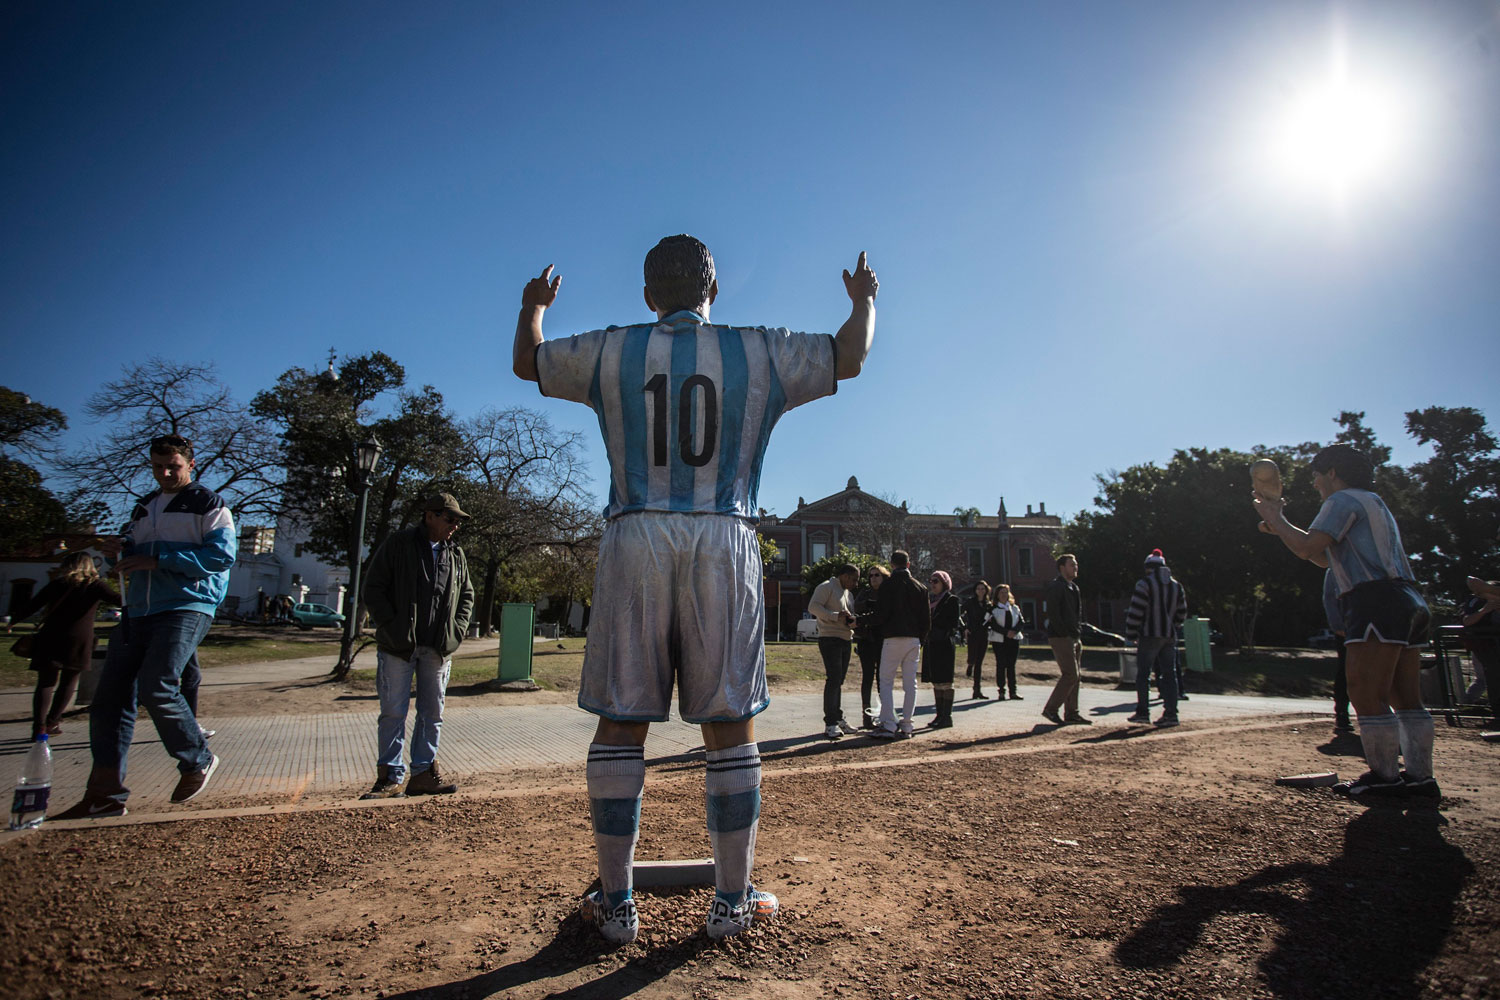 Tourists walk past sculptures of Argentinean players Diego Maradona and player Lionel Messi of Argentina's national soccer team, in the Intendant Alvear Square in Buenos Aires, Argentina on June 19, 2014.